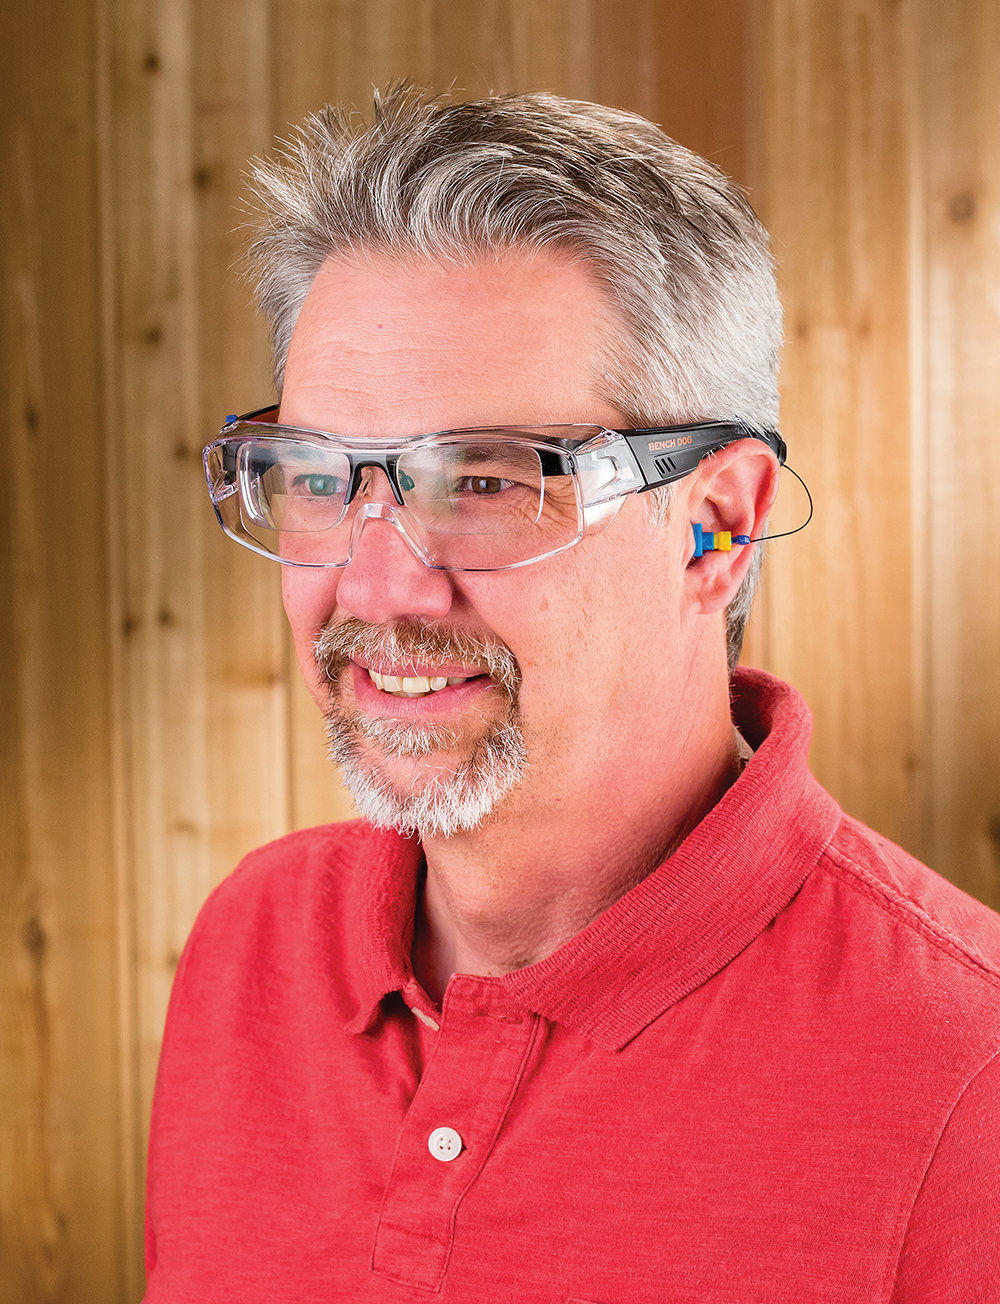 Sound Shield Safety Glasses are also available in a "fit over" design to be worn over eyeglasses.